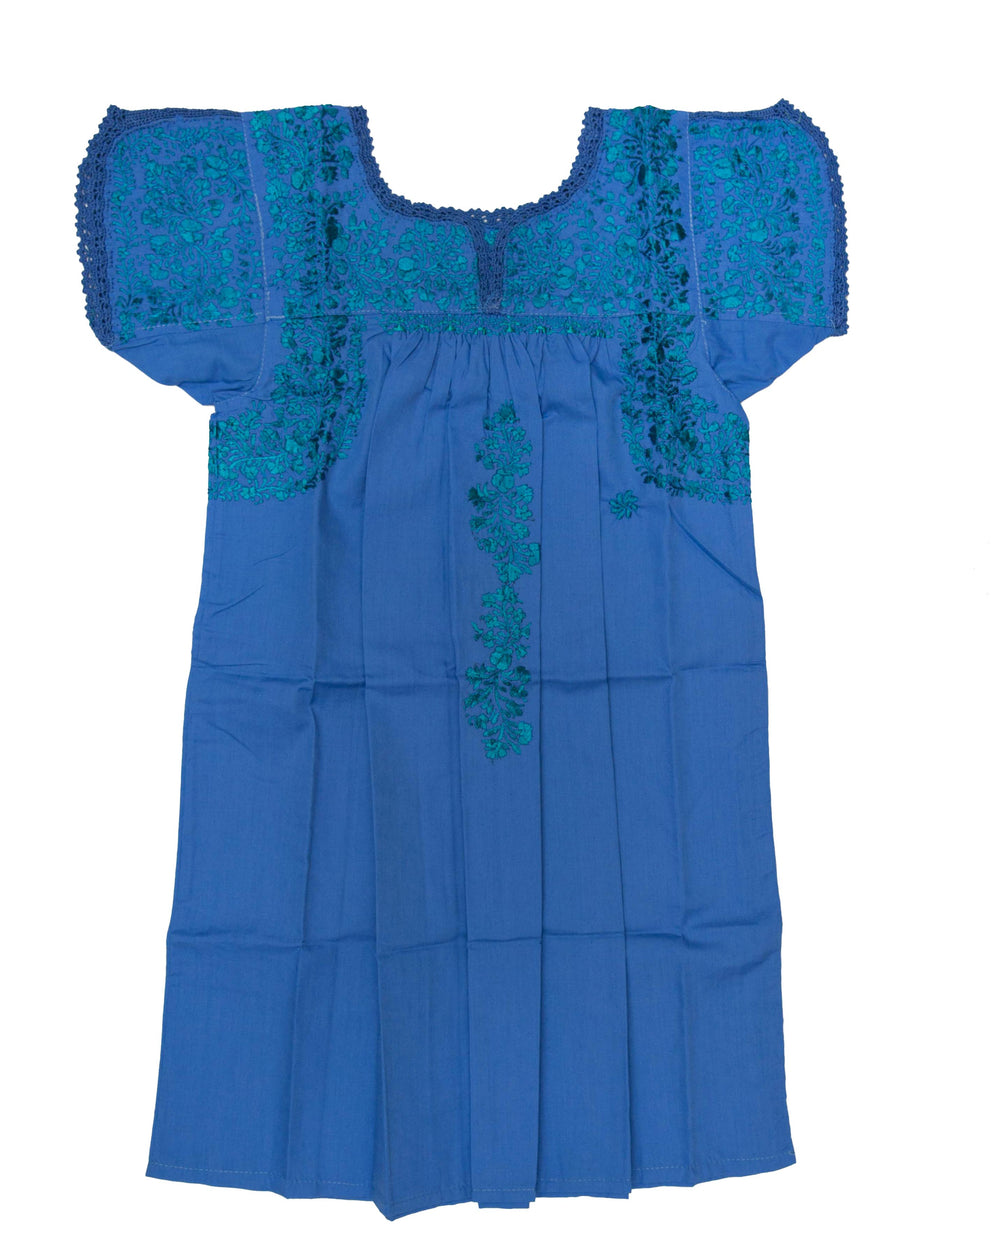 Girls Traditional Dress | Blue with Teal Silk